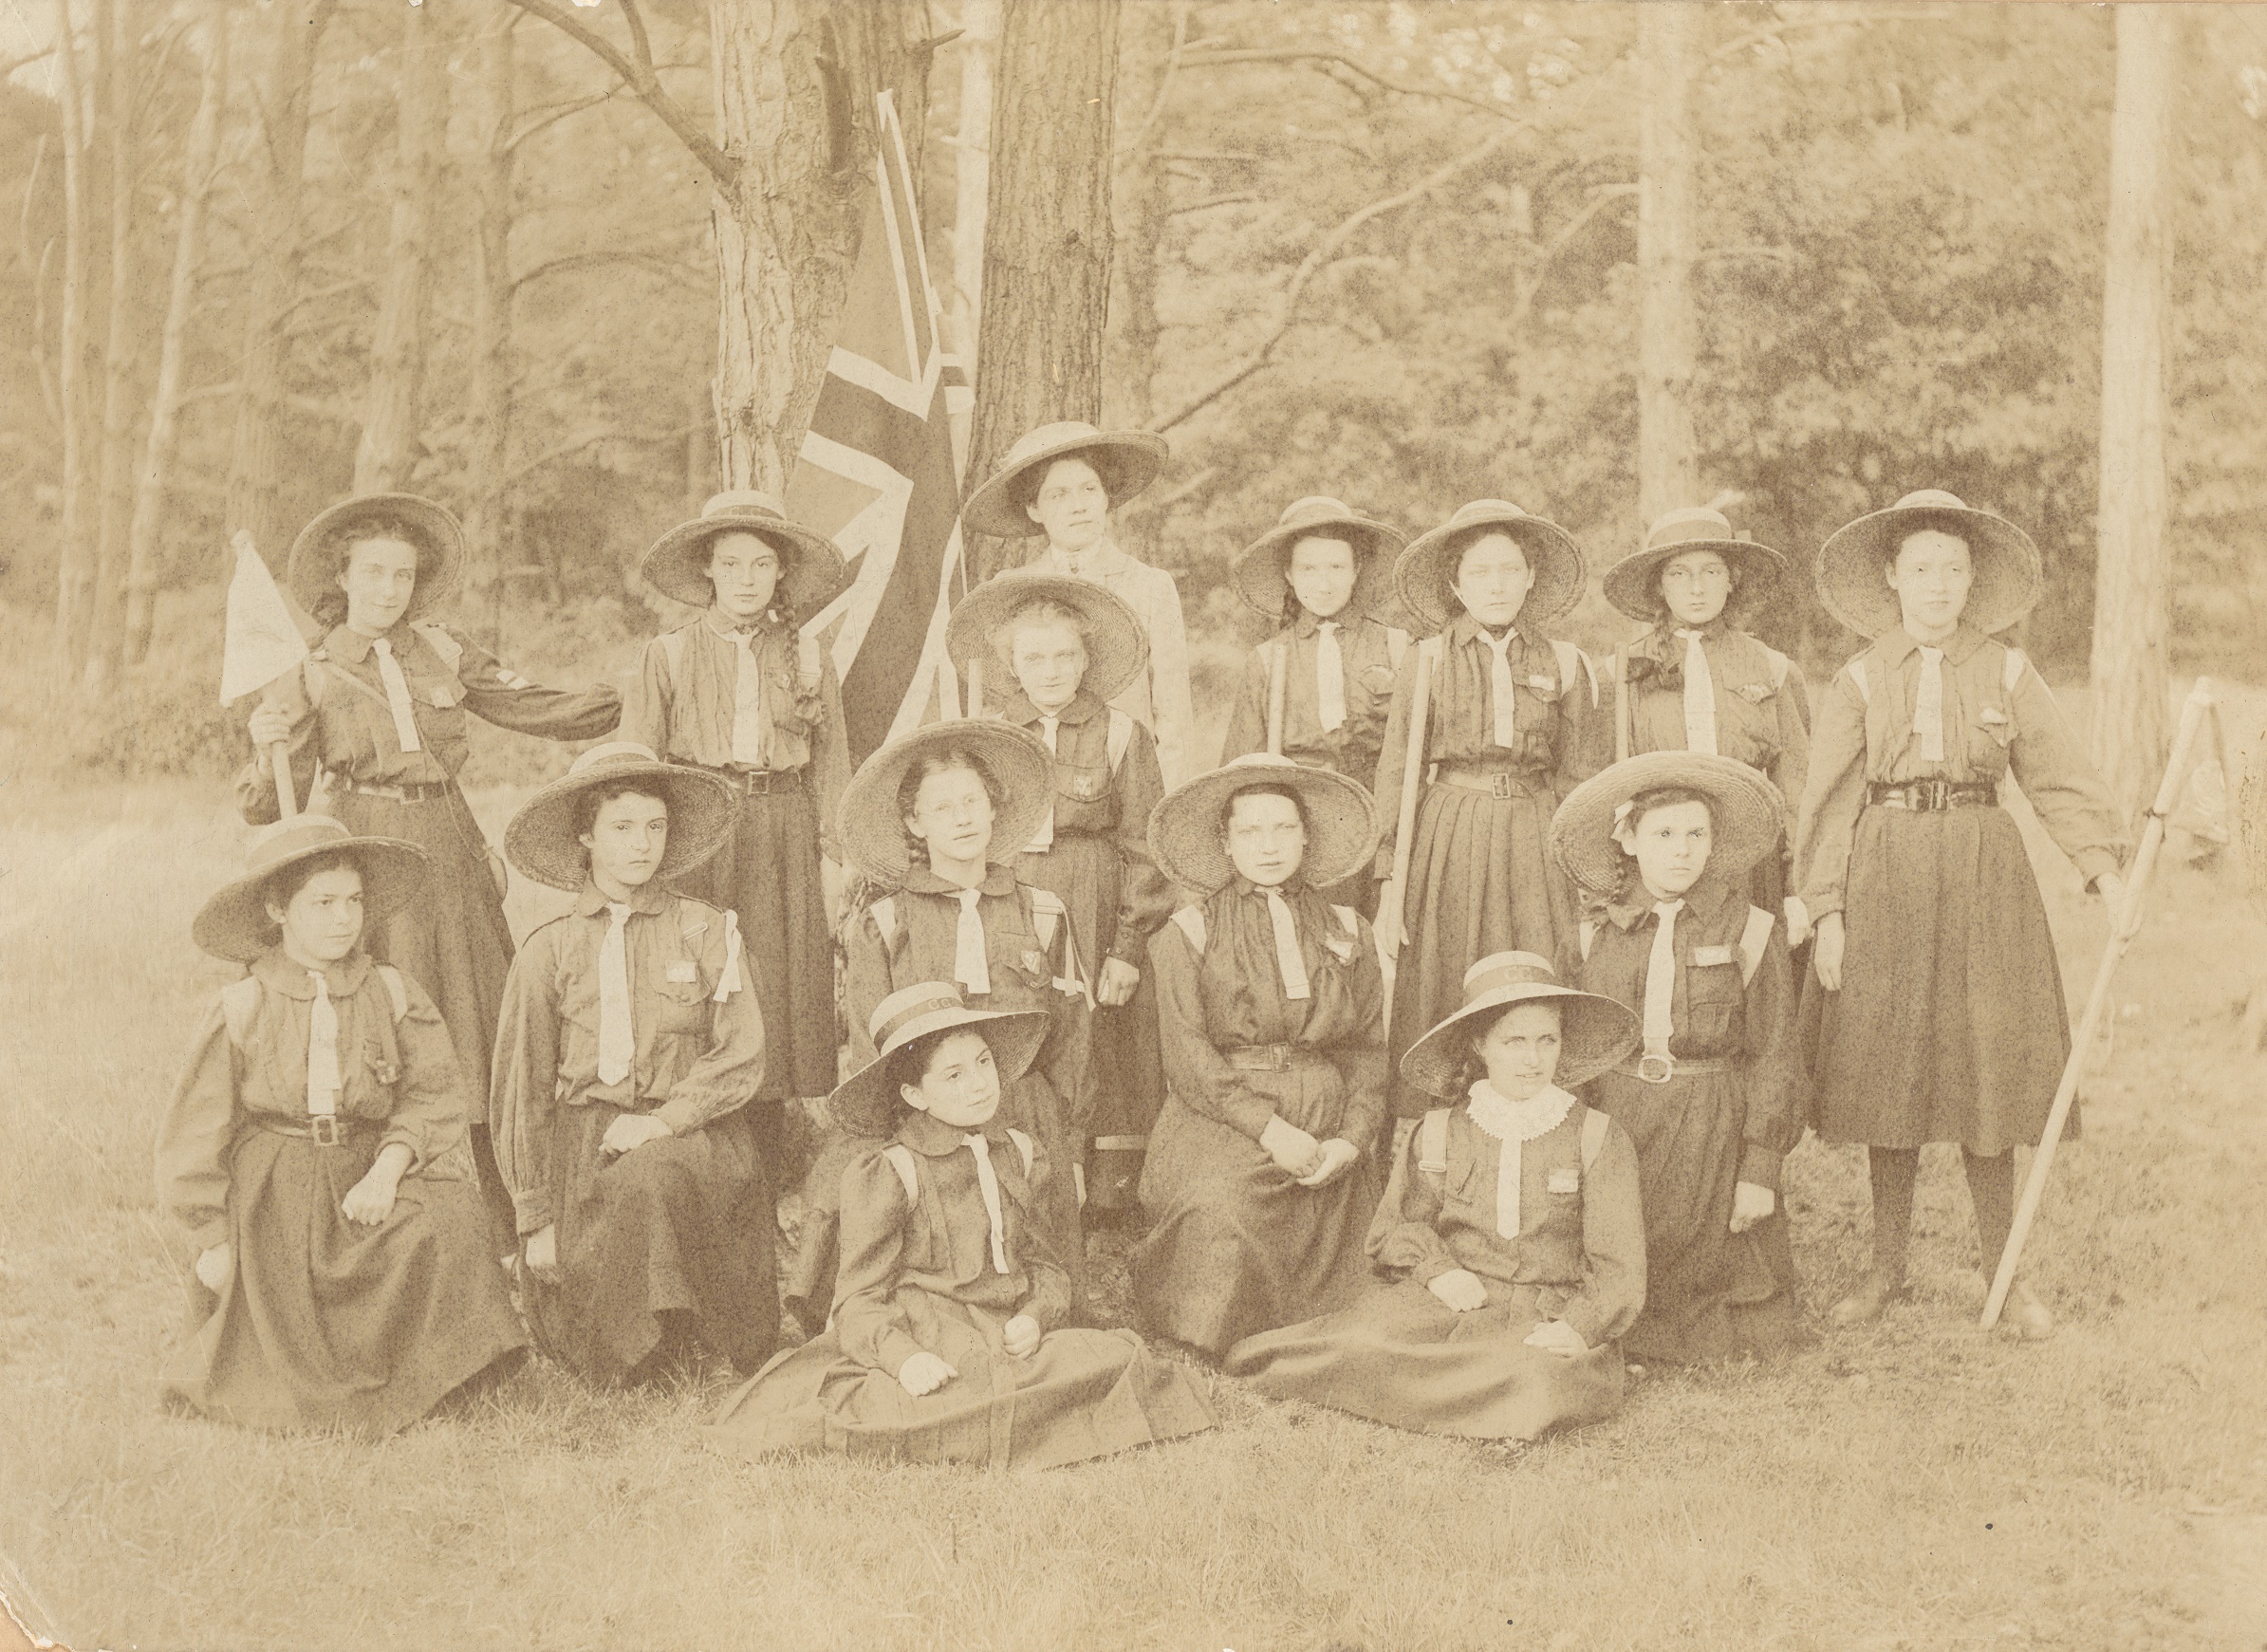 The 1st Weybridge Girl Guides, 1910, at Brooklands Estate. The group of girl guides are seated and standing in possibly the grounds of Brooklands House. The Union Jack is held by Miss James (Captain).